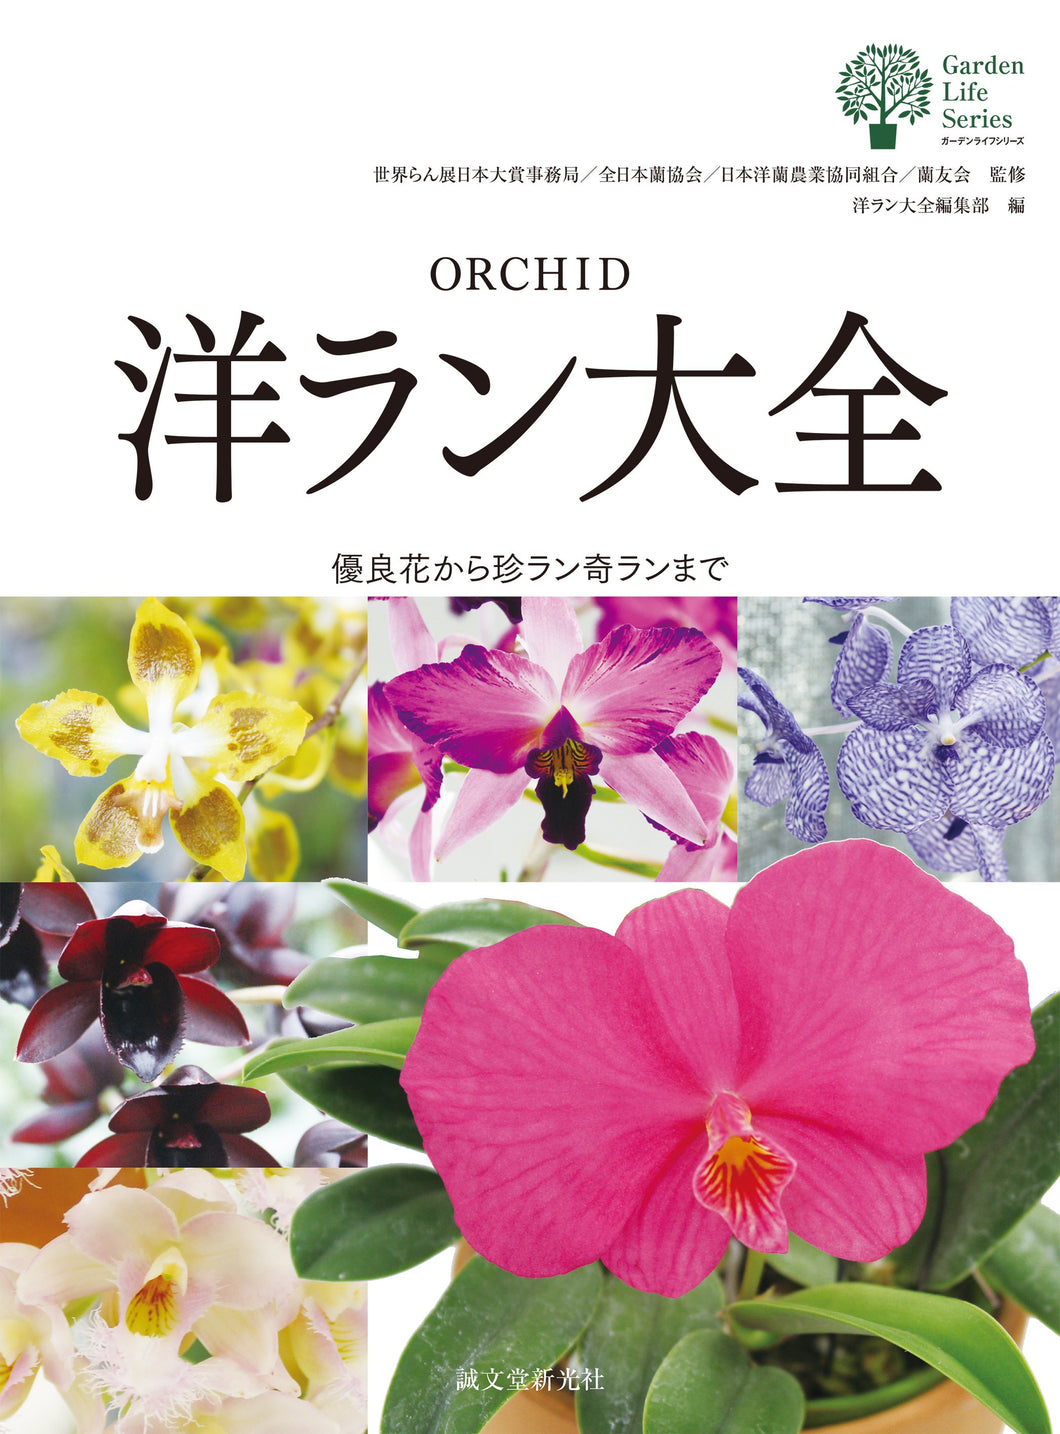 Encyclopedia of Western Orchids